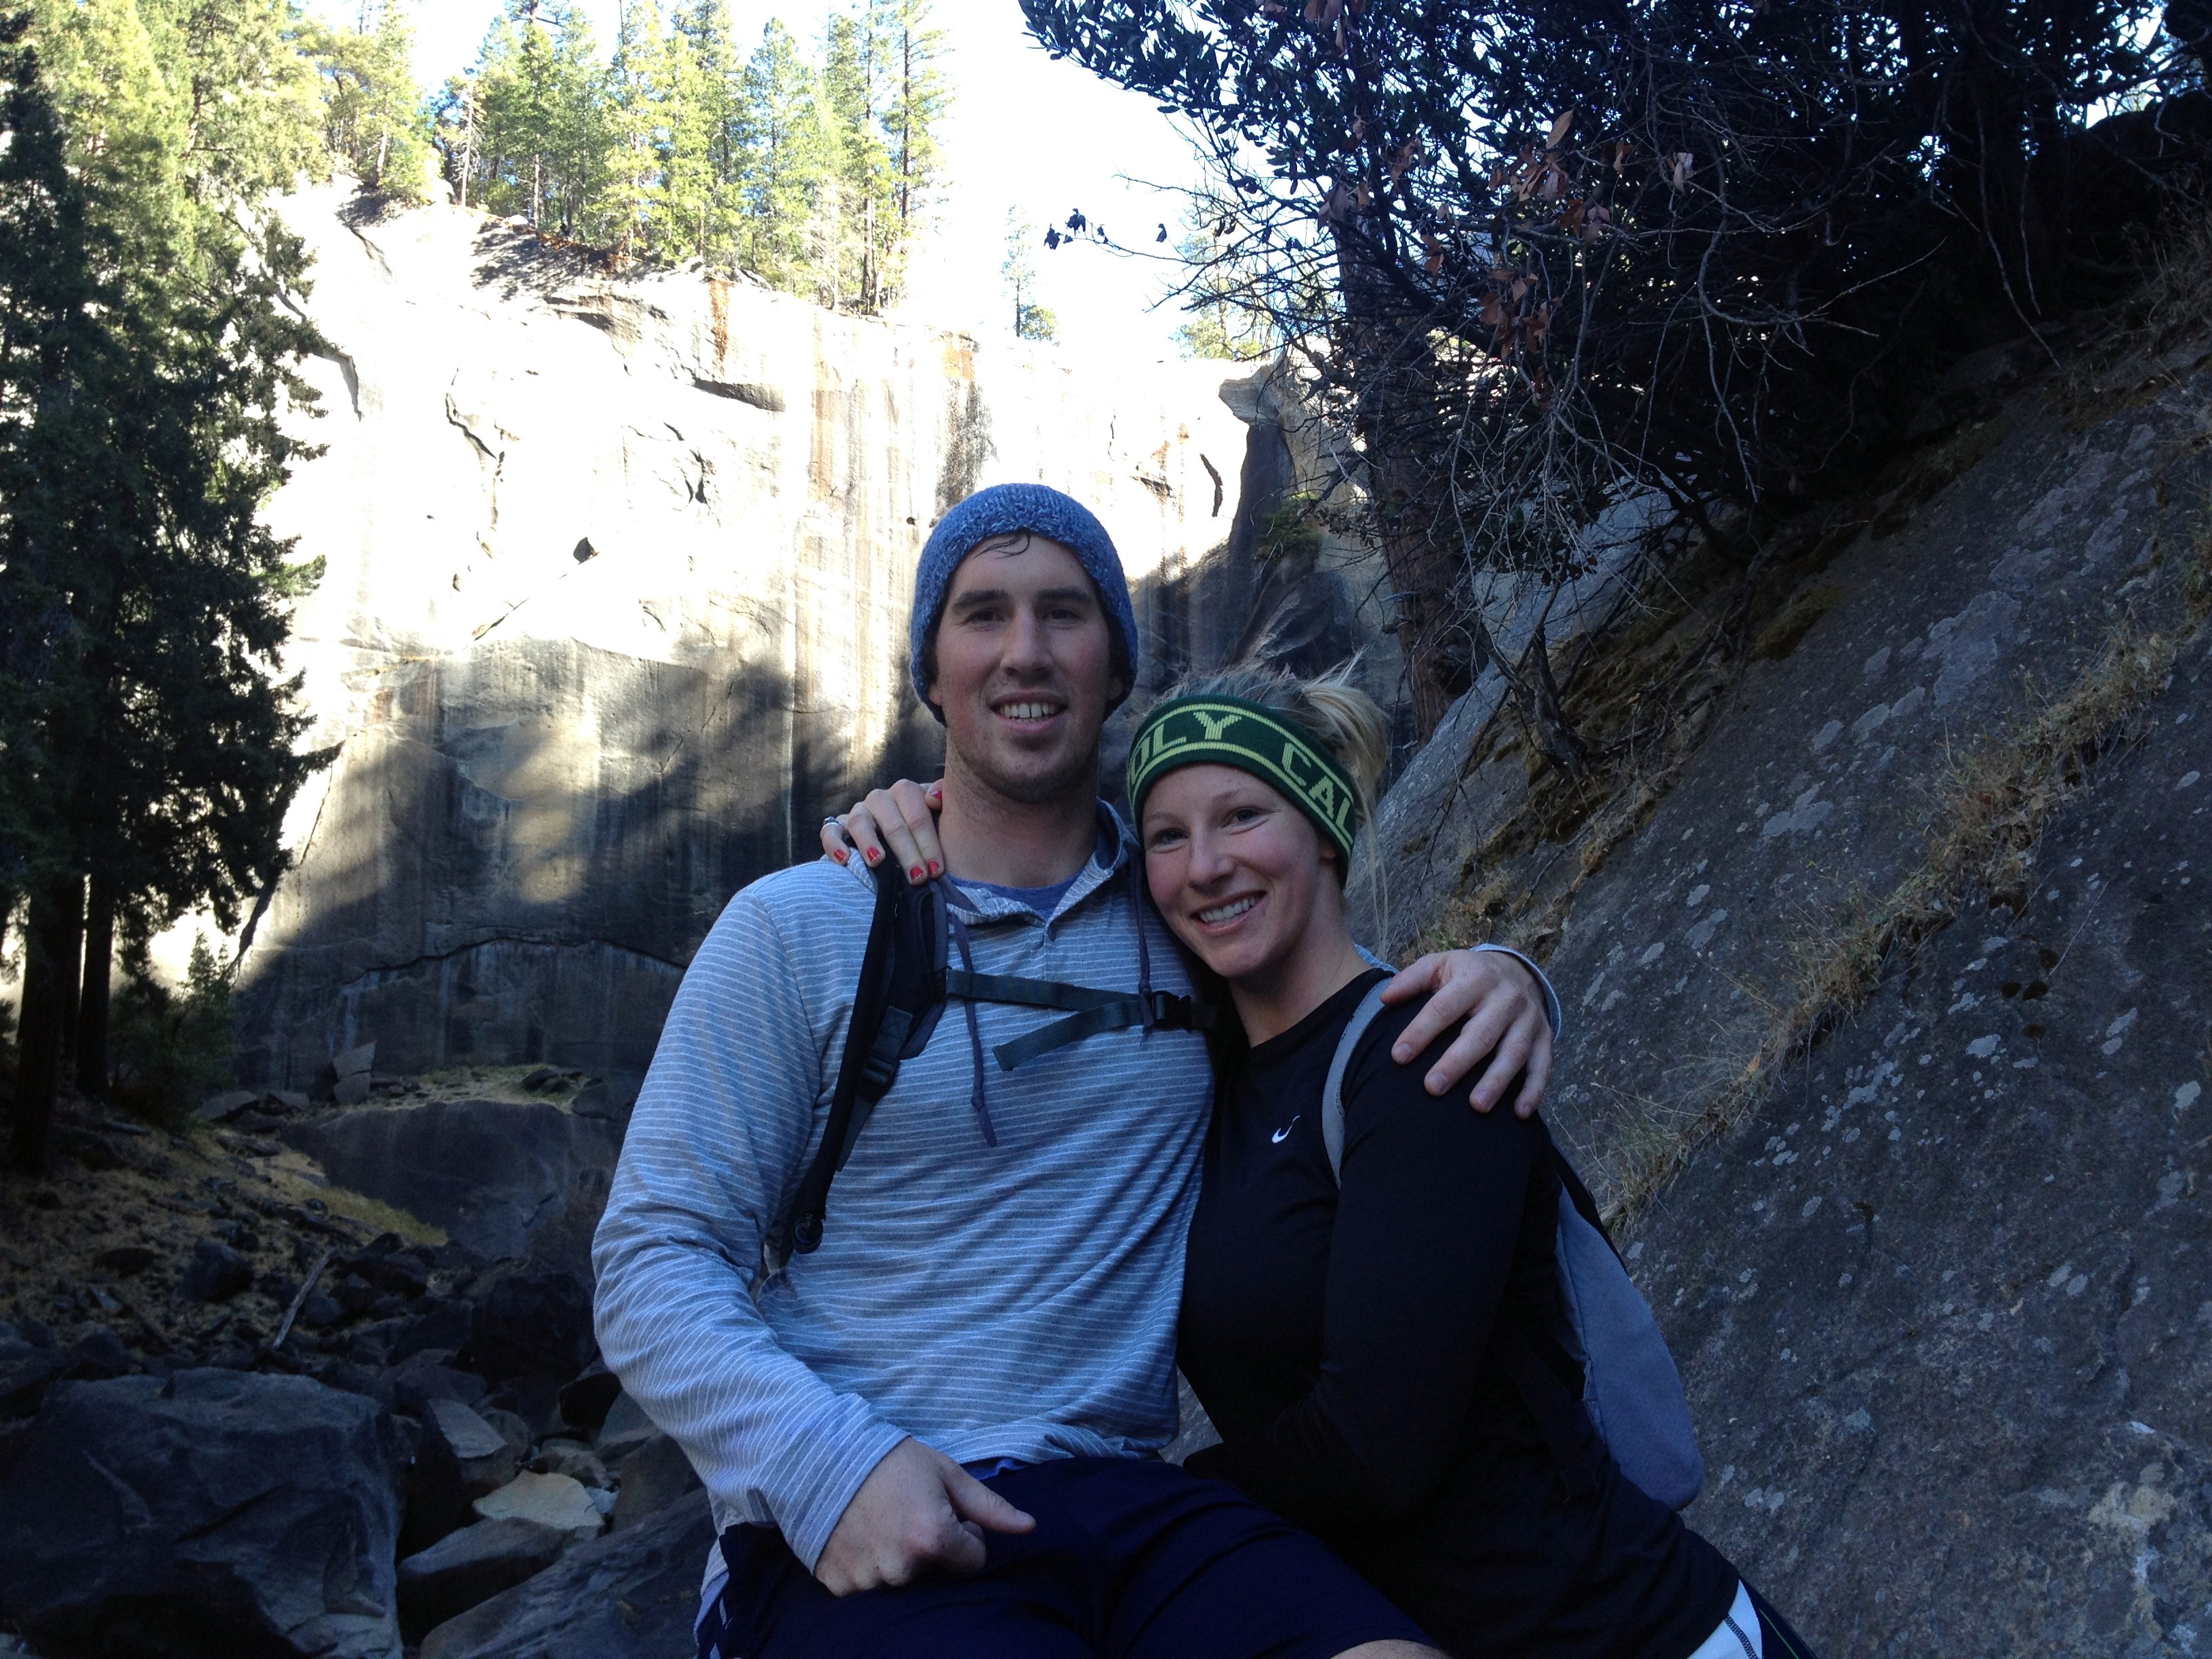 Hiking in Yosemite for our exercise!